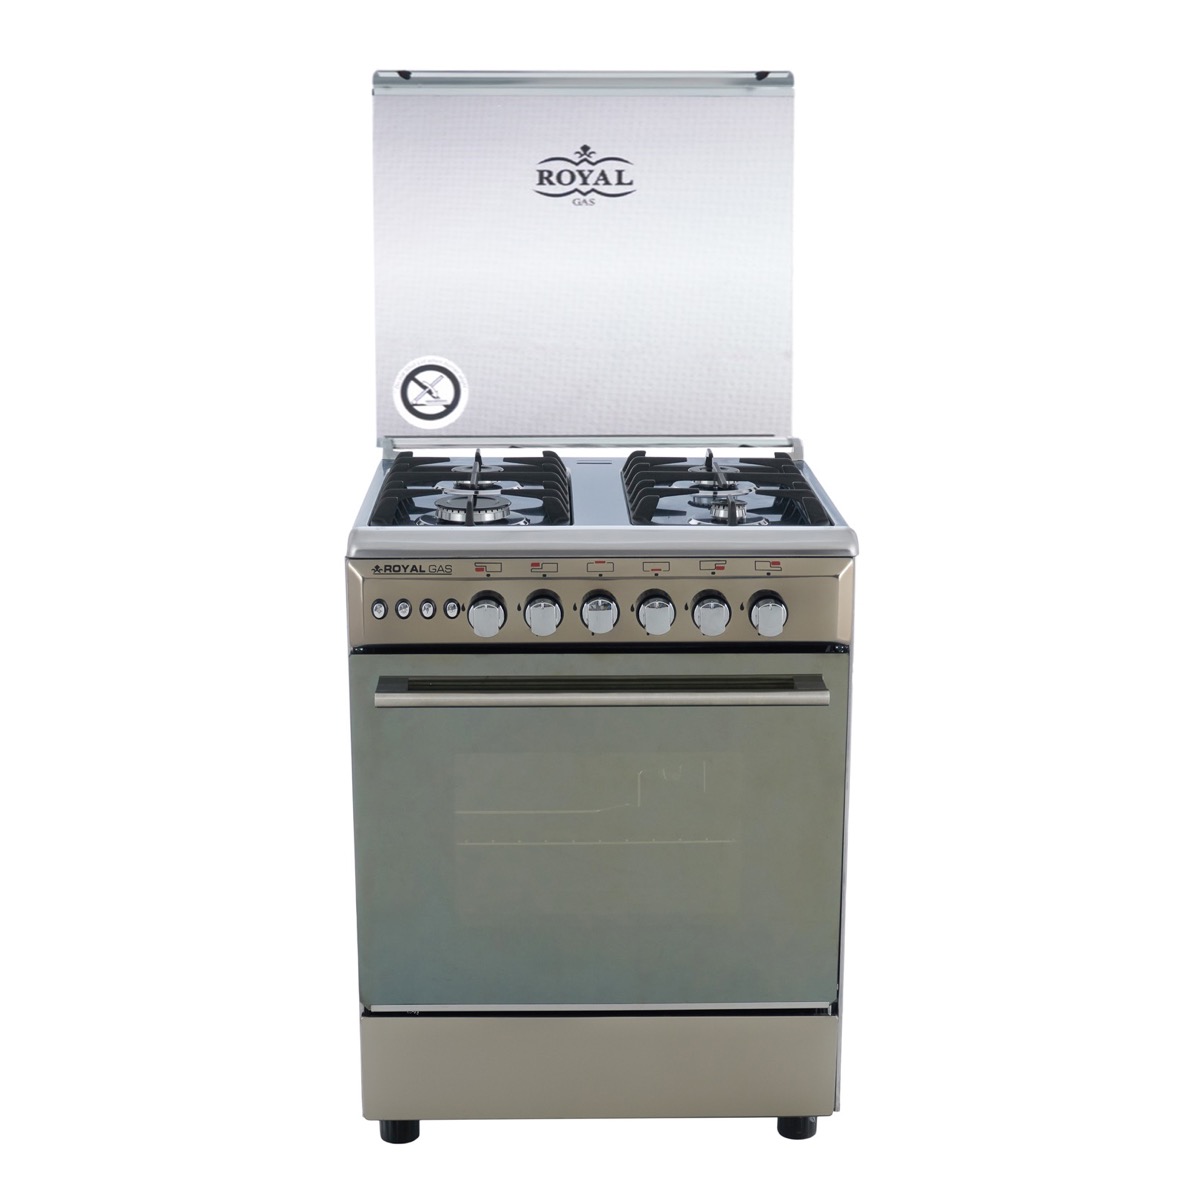 Royal Gas Gas Cooker, 4 Burners, Silver - CR60CSSV